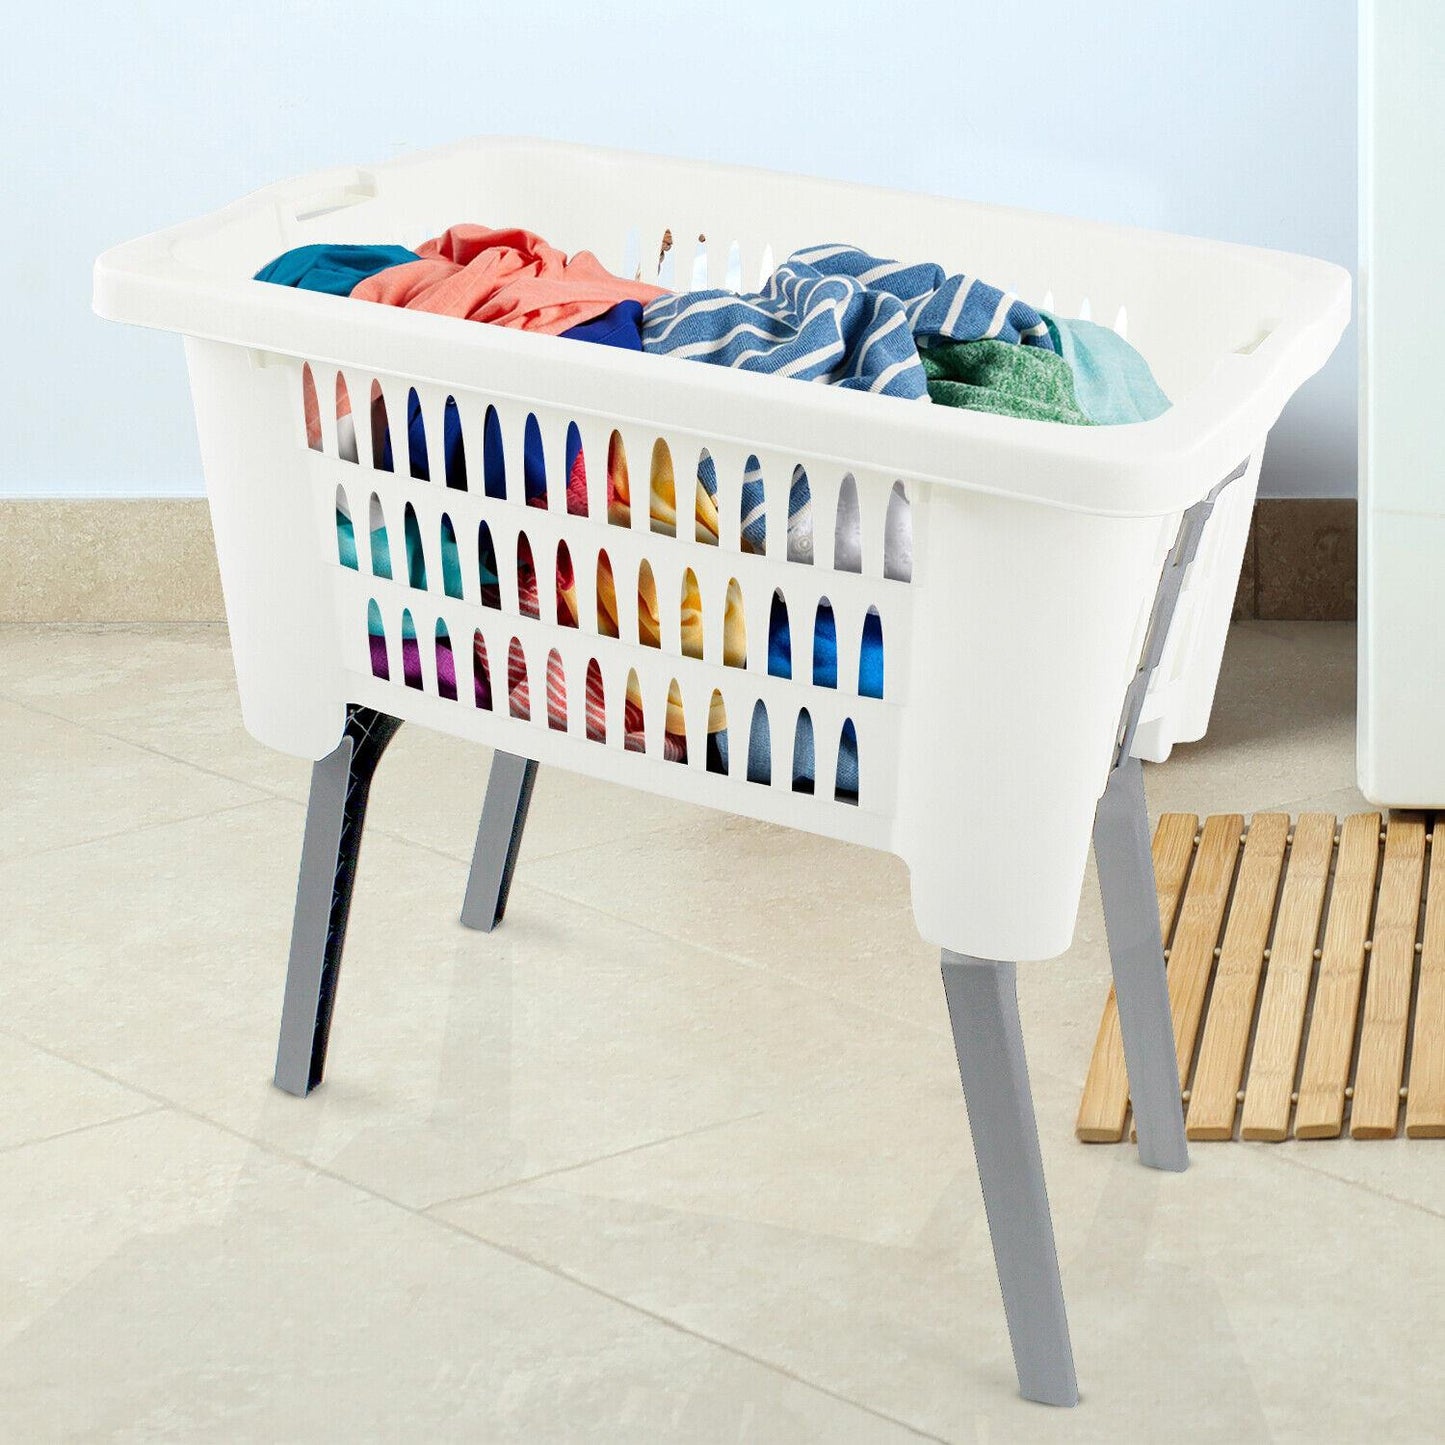 Laundry Basket with Foldable Legs by GEEZY - UKBuyZone